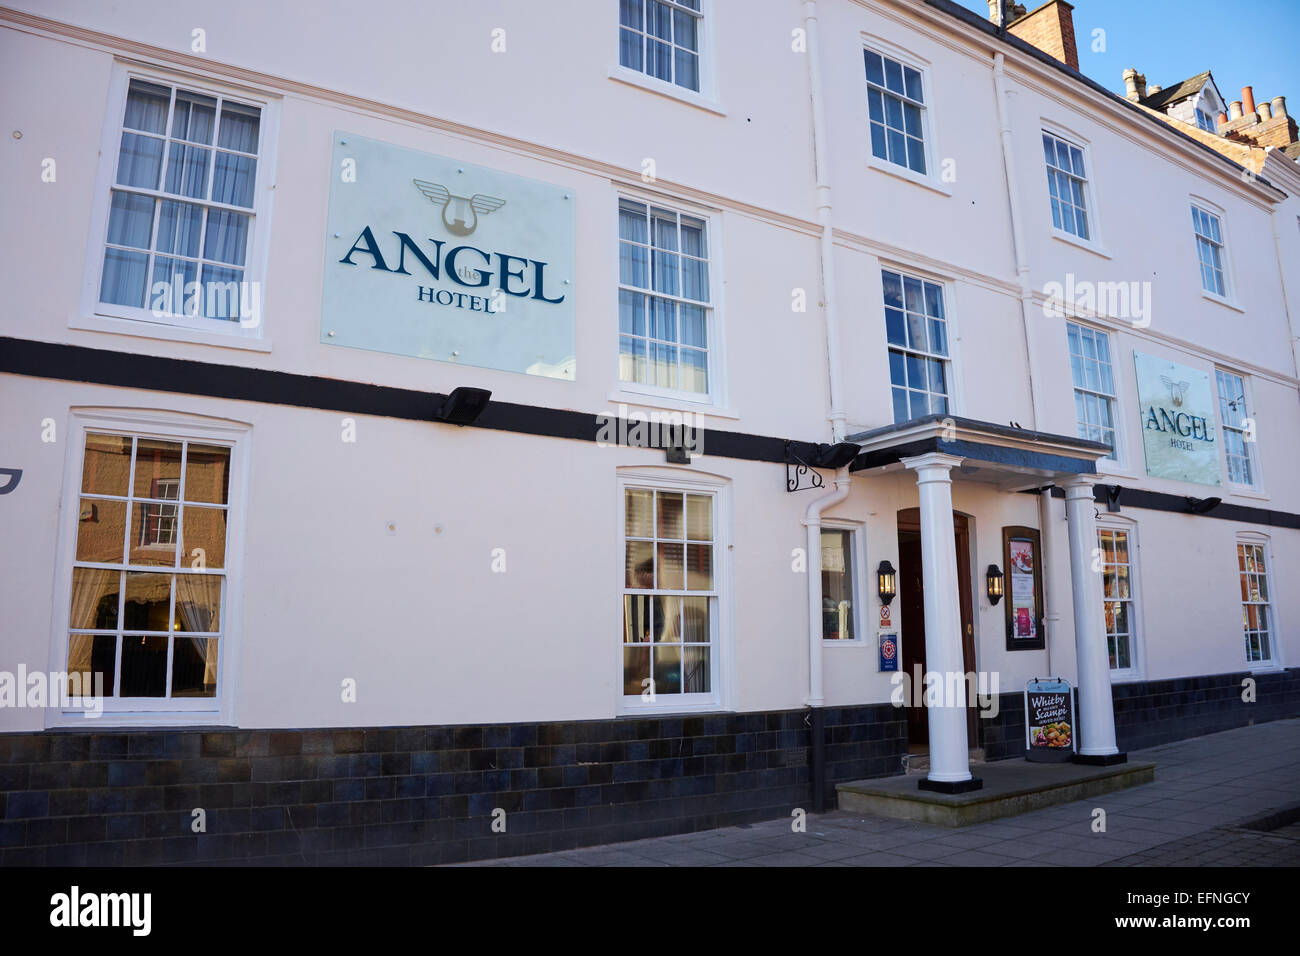 Former Coaching Inn High Resolution Stock Photography and Images - Alamy